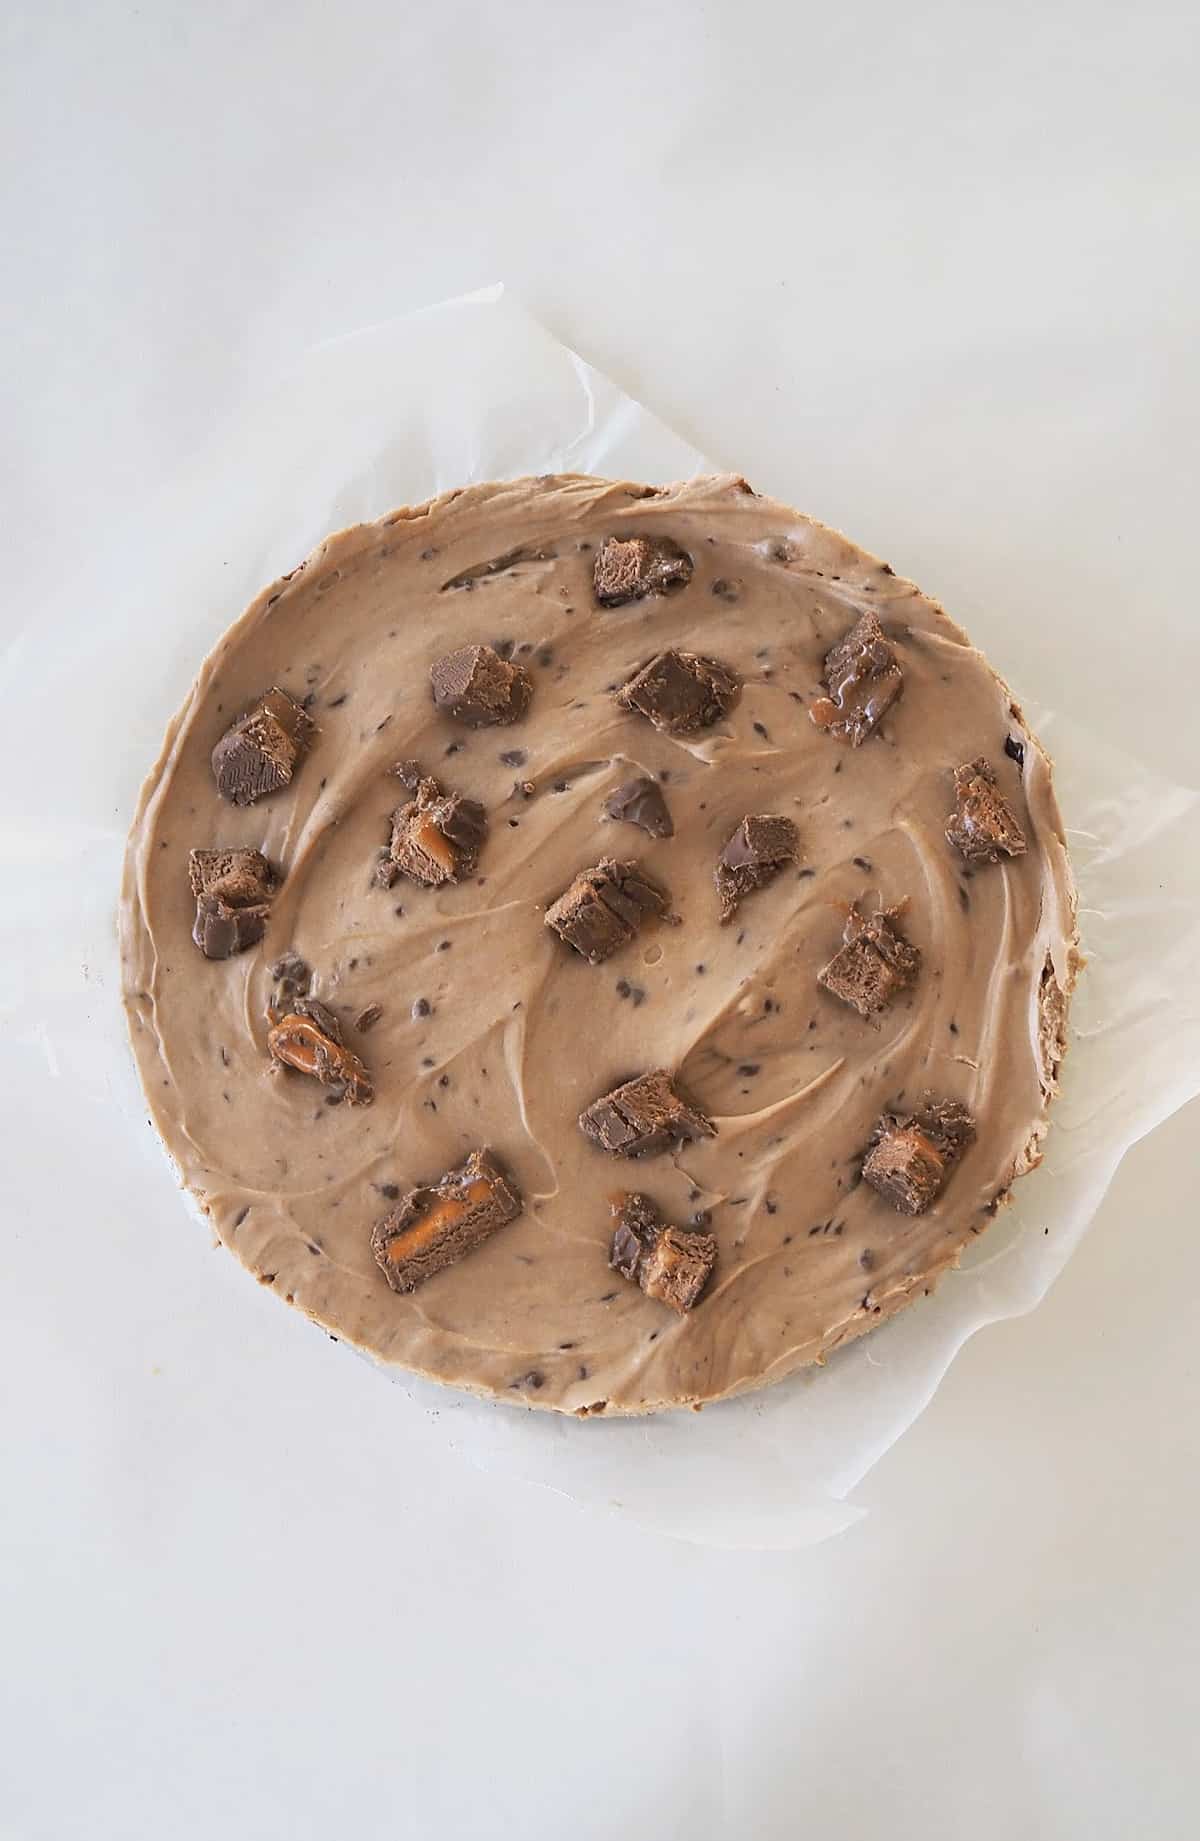 Overhead view of a Mars Bar Cheesecake sitting on a sheet of baking paper.